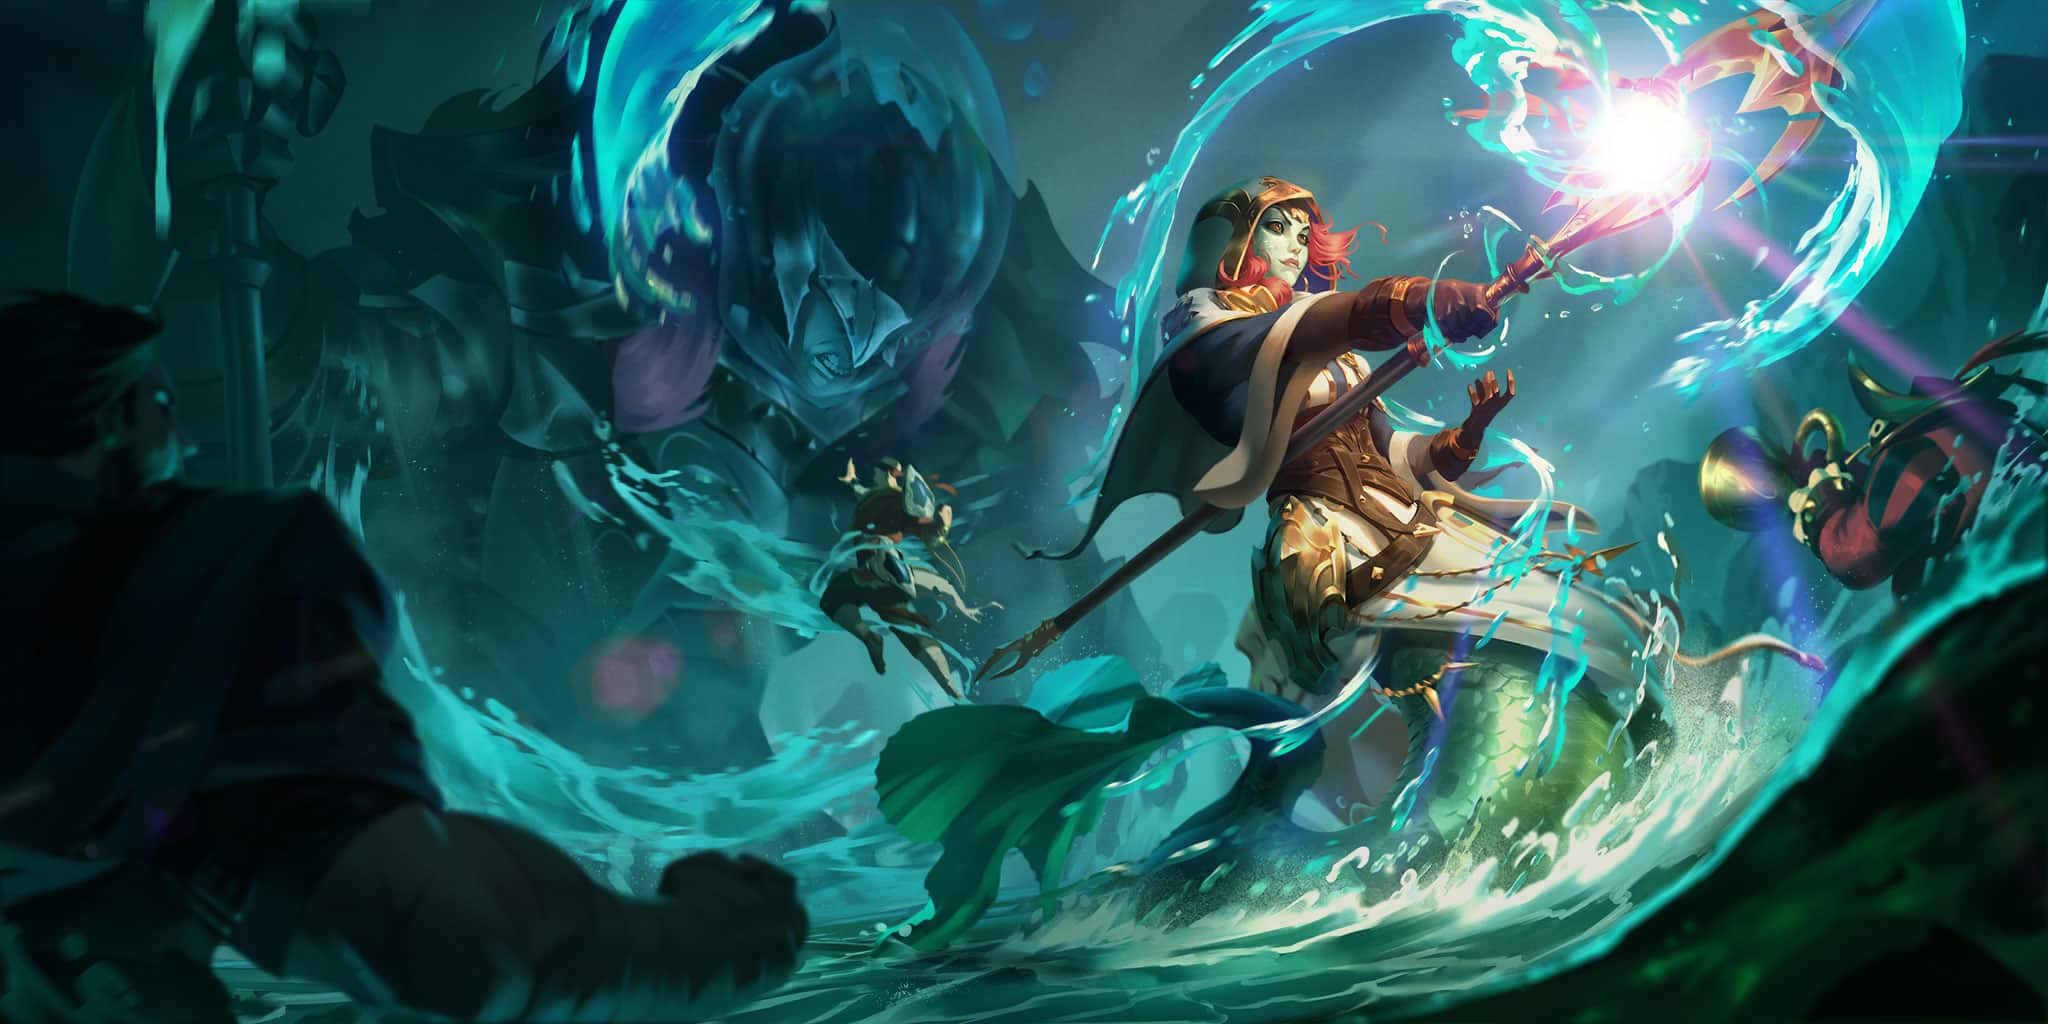 Bard Illaoi Deck Guide - Everything You Need to Know! • Deck